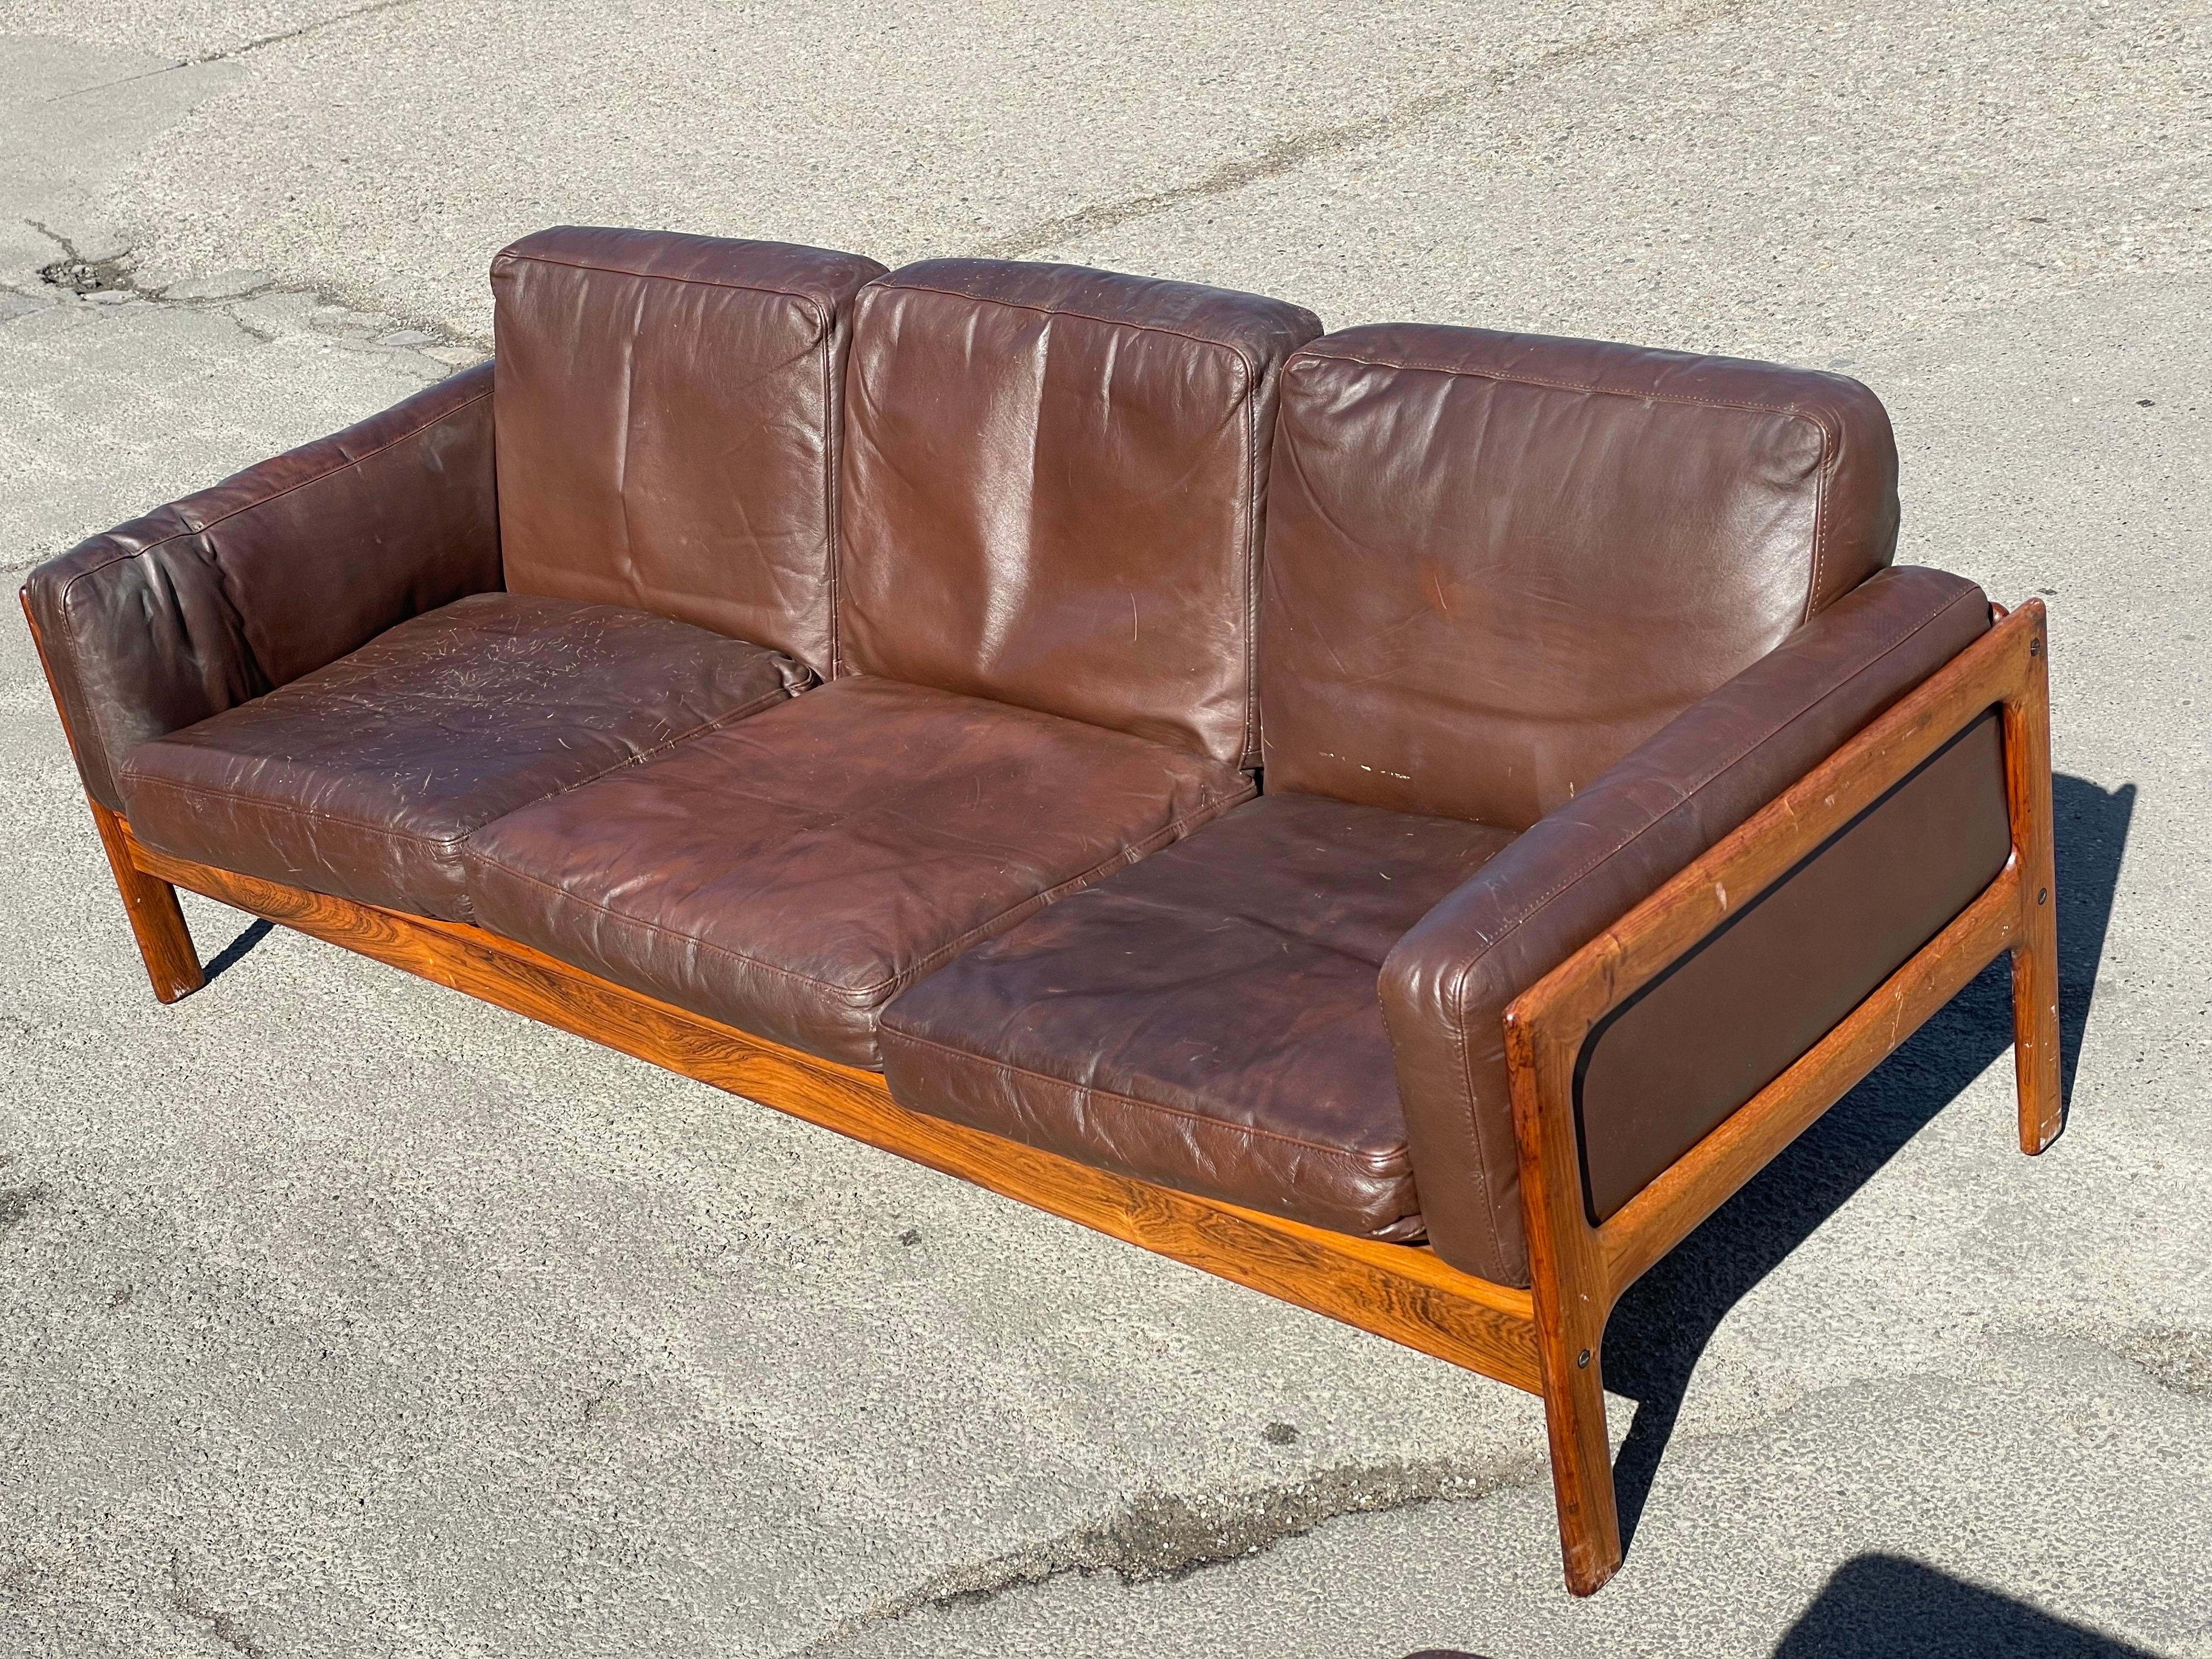 Danish 1970s low rosewood and leather sofa and armchairs by Komfort of Randers
Komfort of Randers were a small quality Danish maker who used various designers such H.W Klein as Arne Wahl Iversen in the 1960s and 1970’s . They are best known for